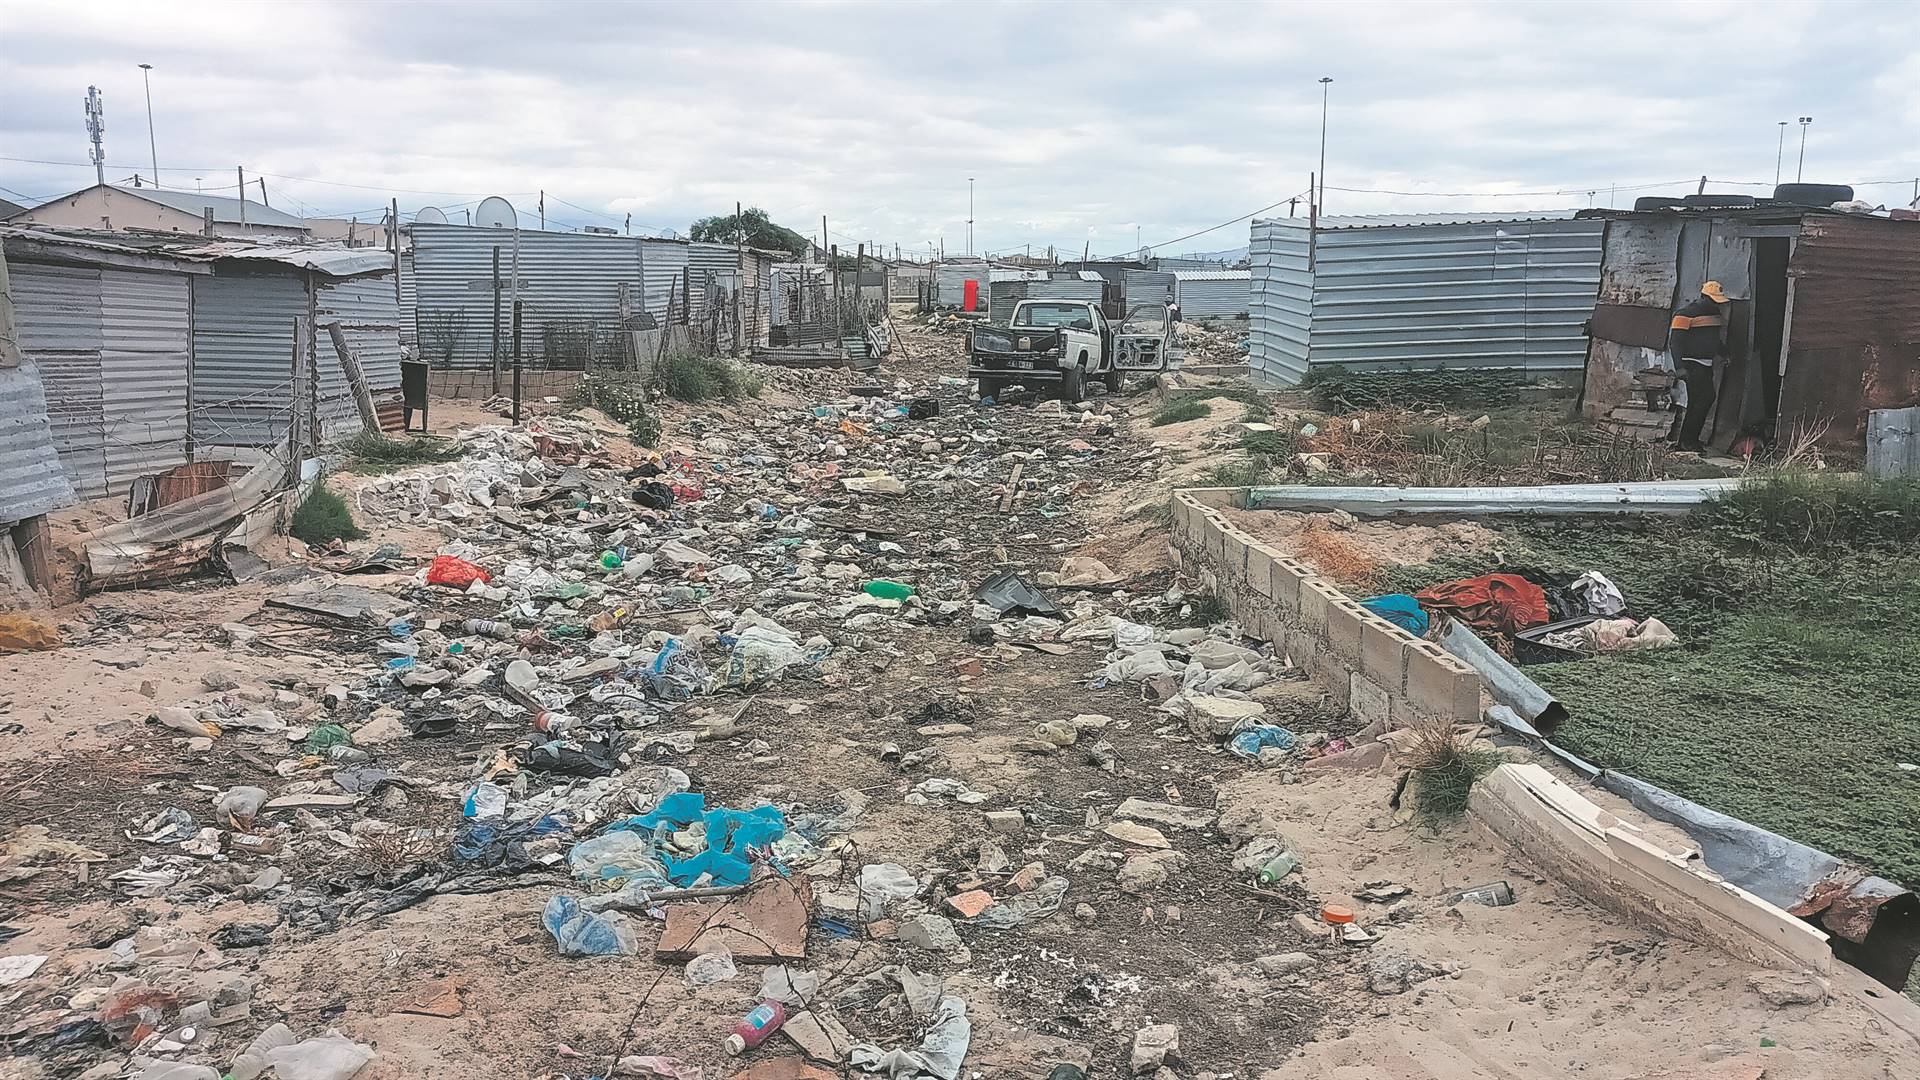 Some of the dirt left behind after the sewage was diverted to another drain.PHOTOS: unathi obose